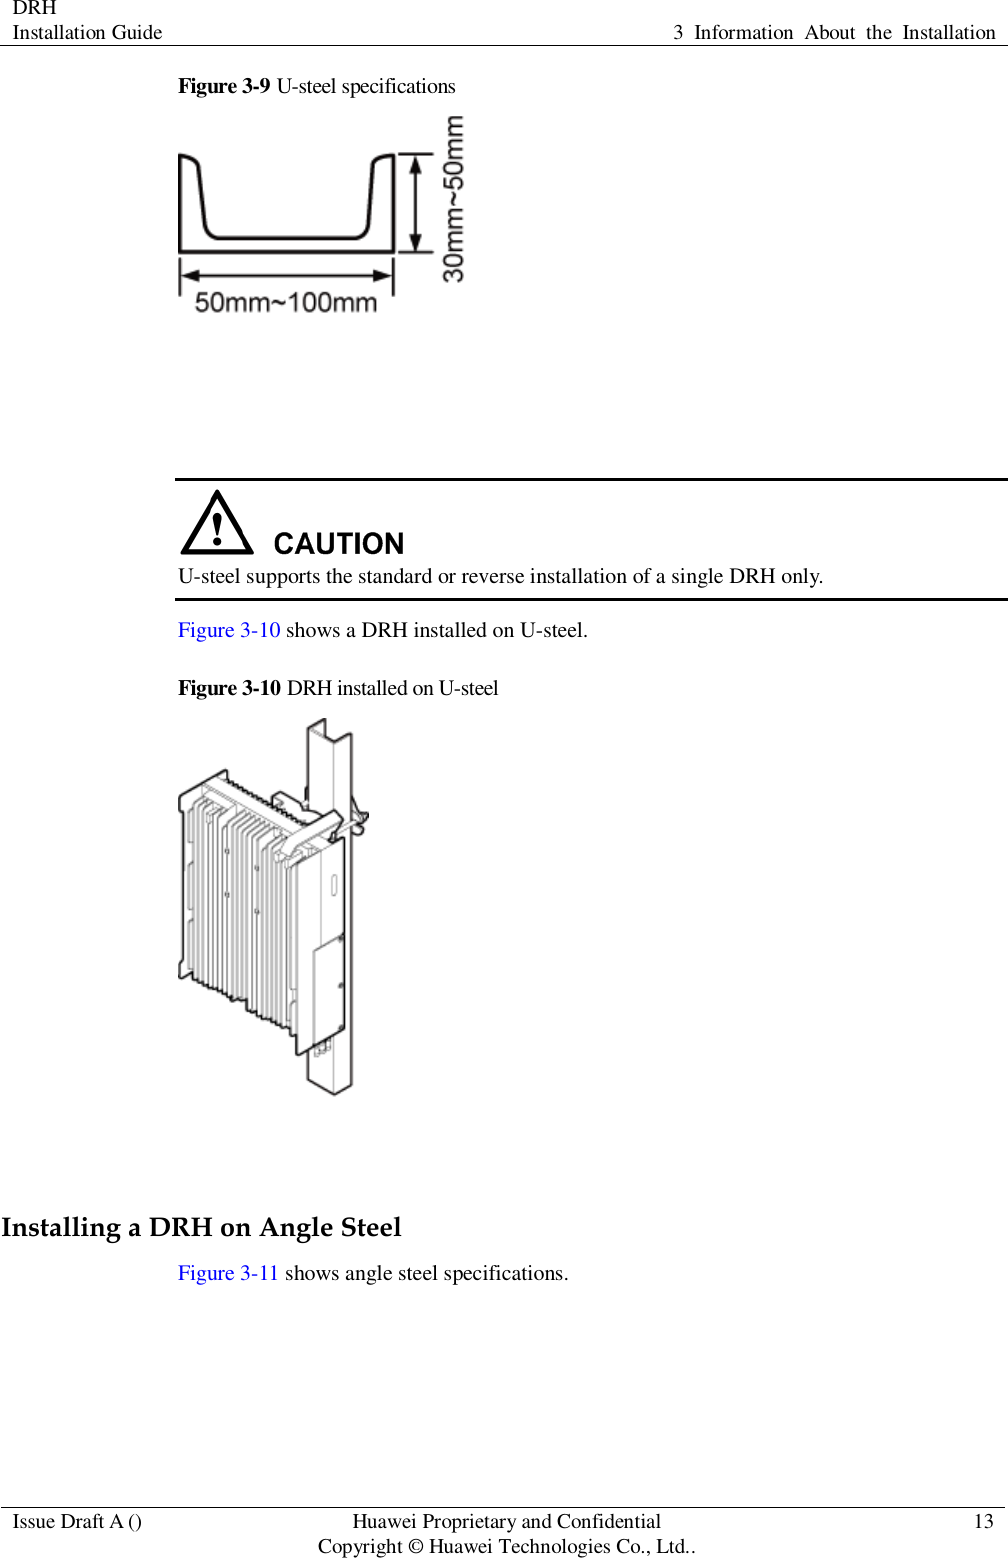 DRH   Installation Guide 3  Information  About  the  Installation  Issue Draft A () Huawei Proprietary and Confidential                                     Copyright © Huawei Technologies Co., Ltd.. 13  Figure 3-9 U-steel specifications     U-steel supports the standard or reverse installation of a single DRH only. Figure 3-10 shows a DRH installed on U-steel. Figure 3-10 DRH installed on U-steel   Installing a DRH on Angle Steel Figure 3-11 shows angle steel specifications. 